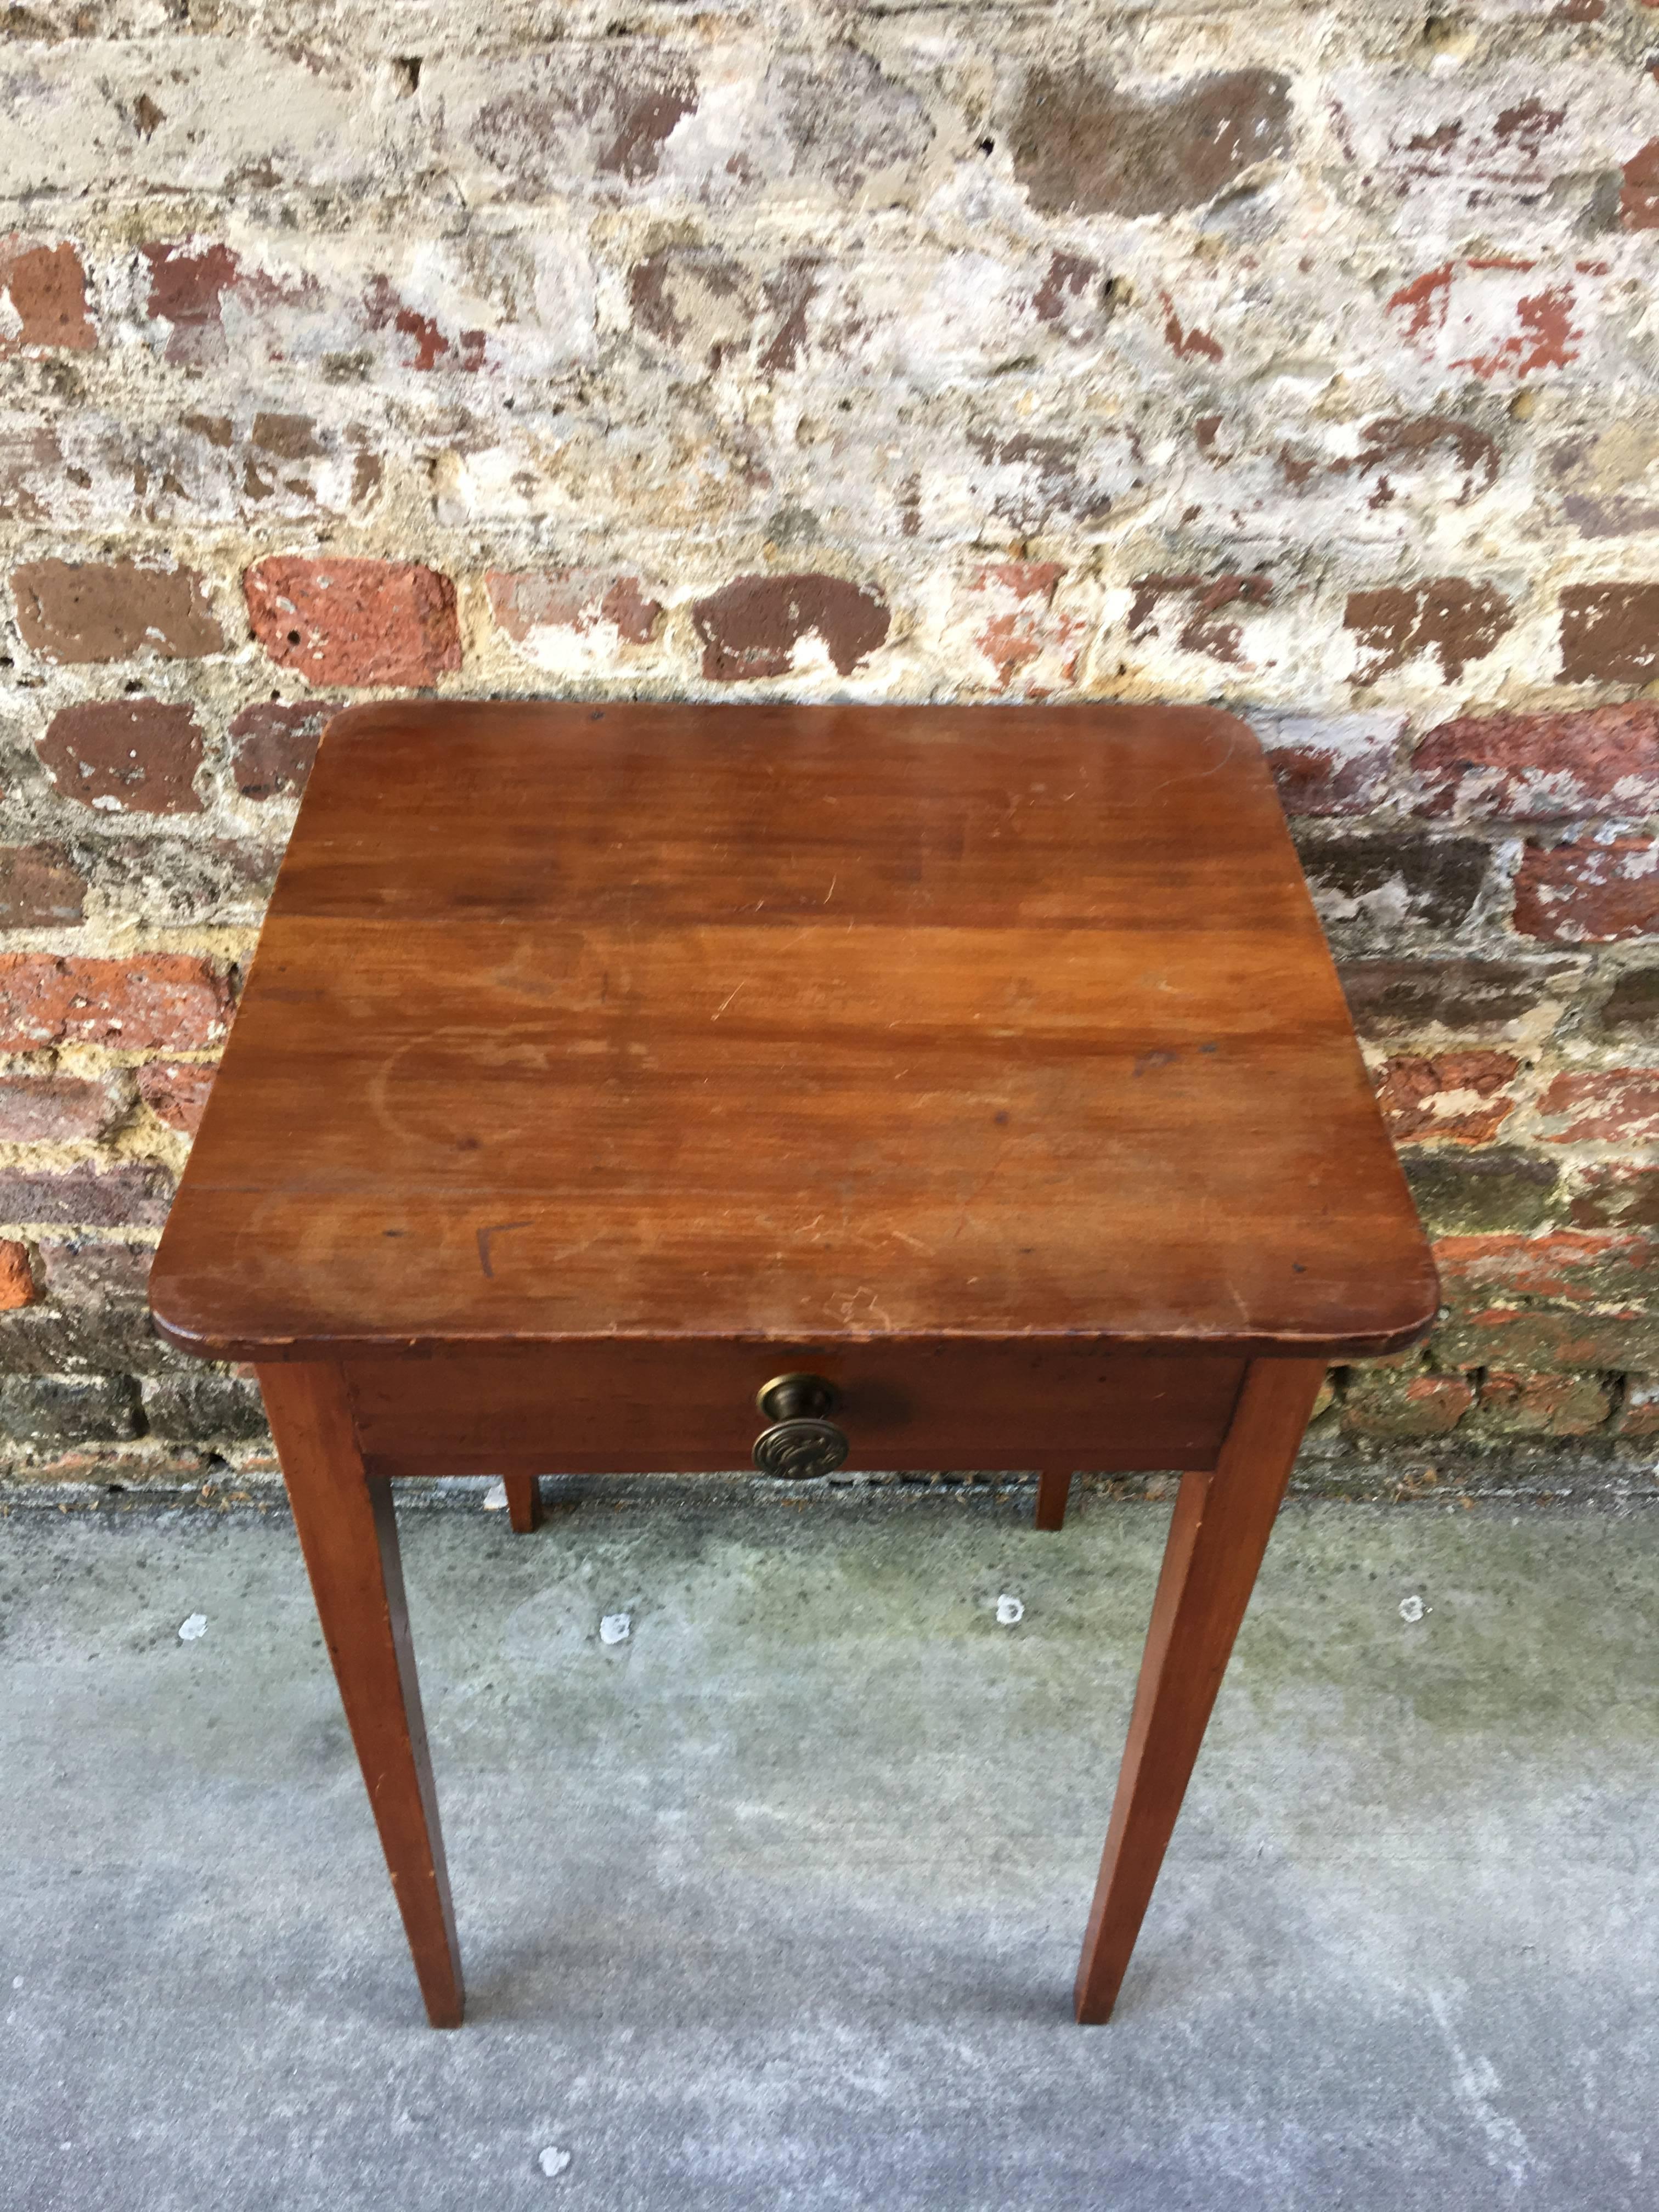 American cherry and maple tapered leg work table. Single drawer.